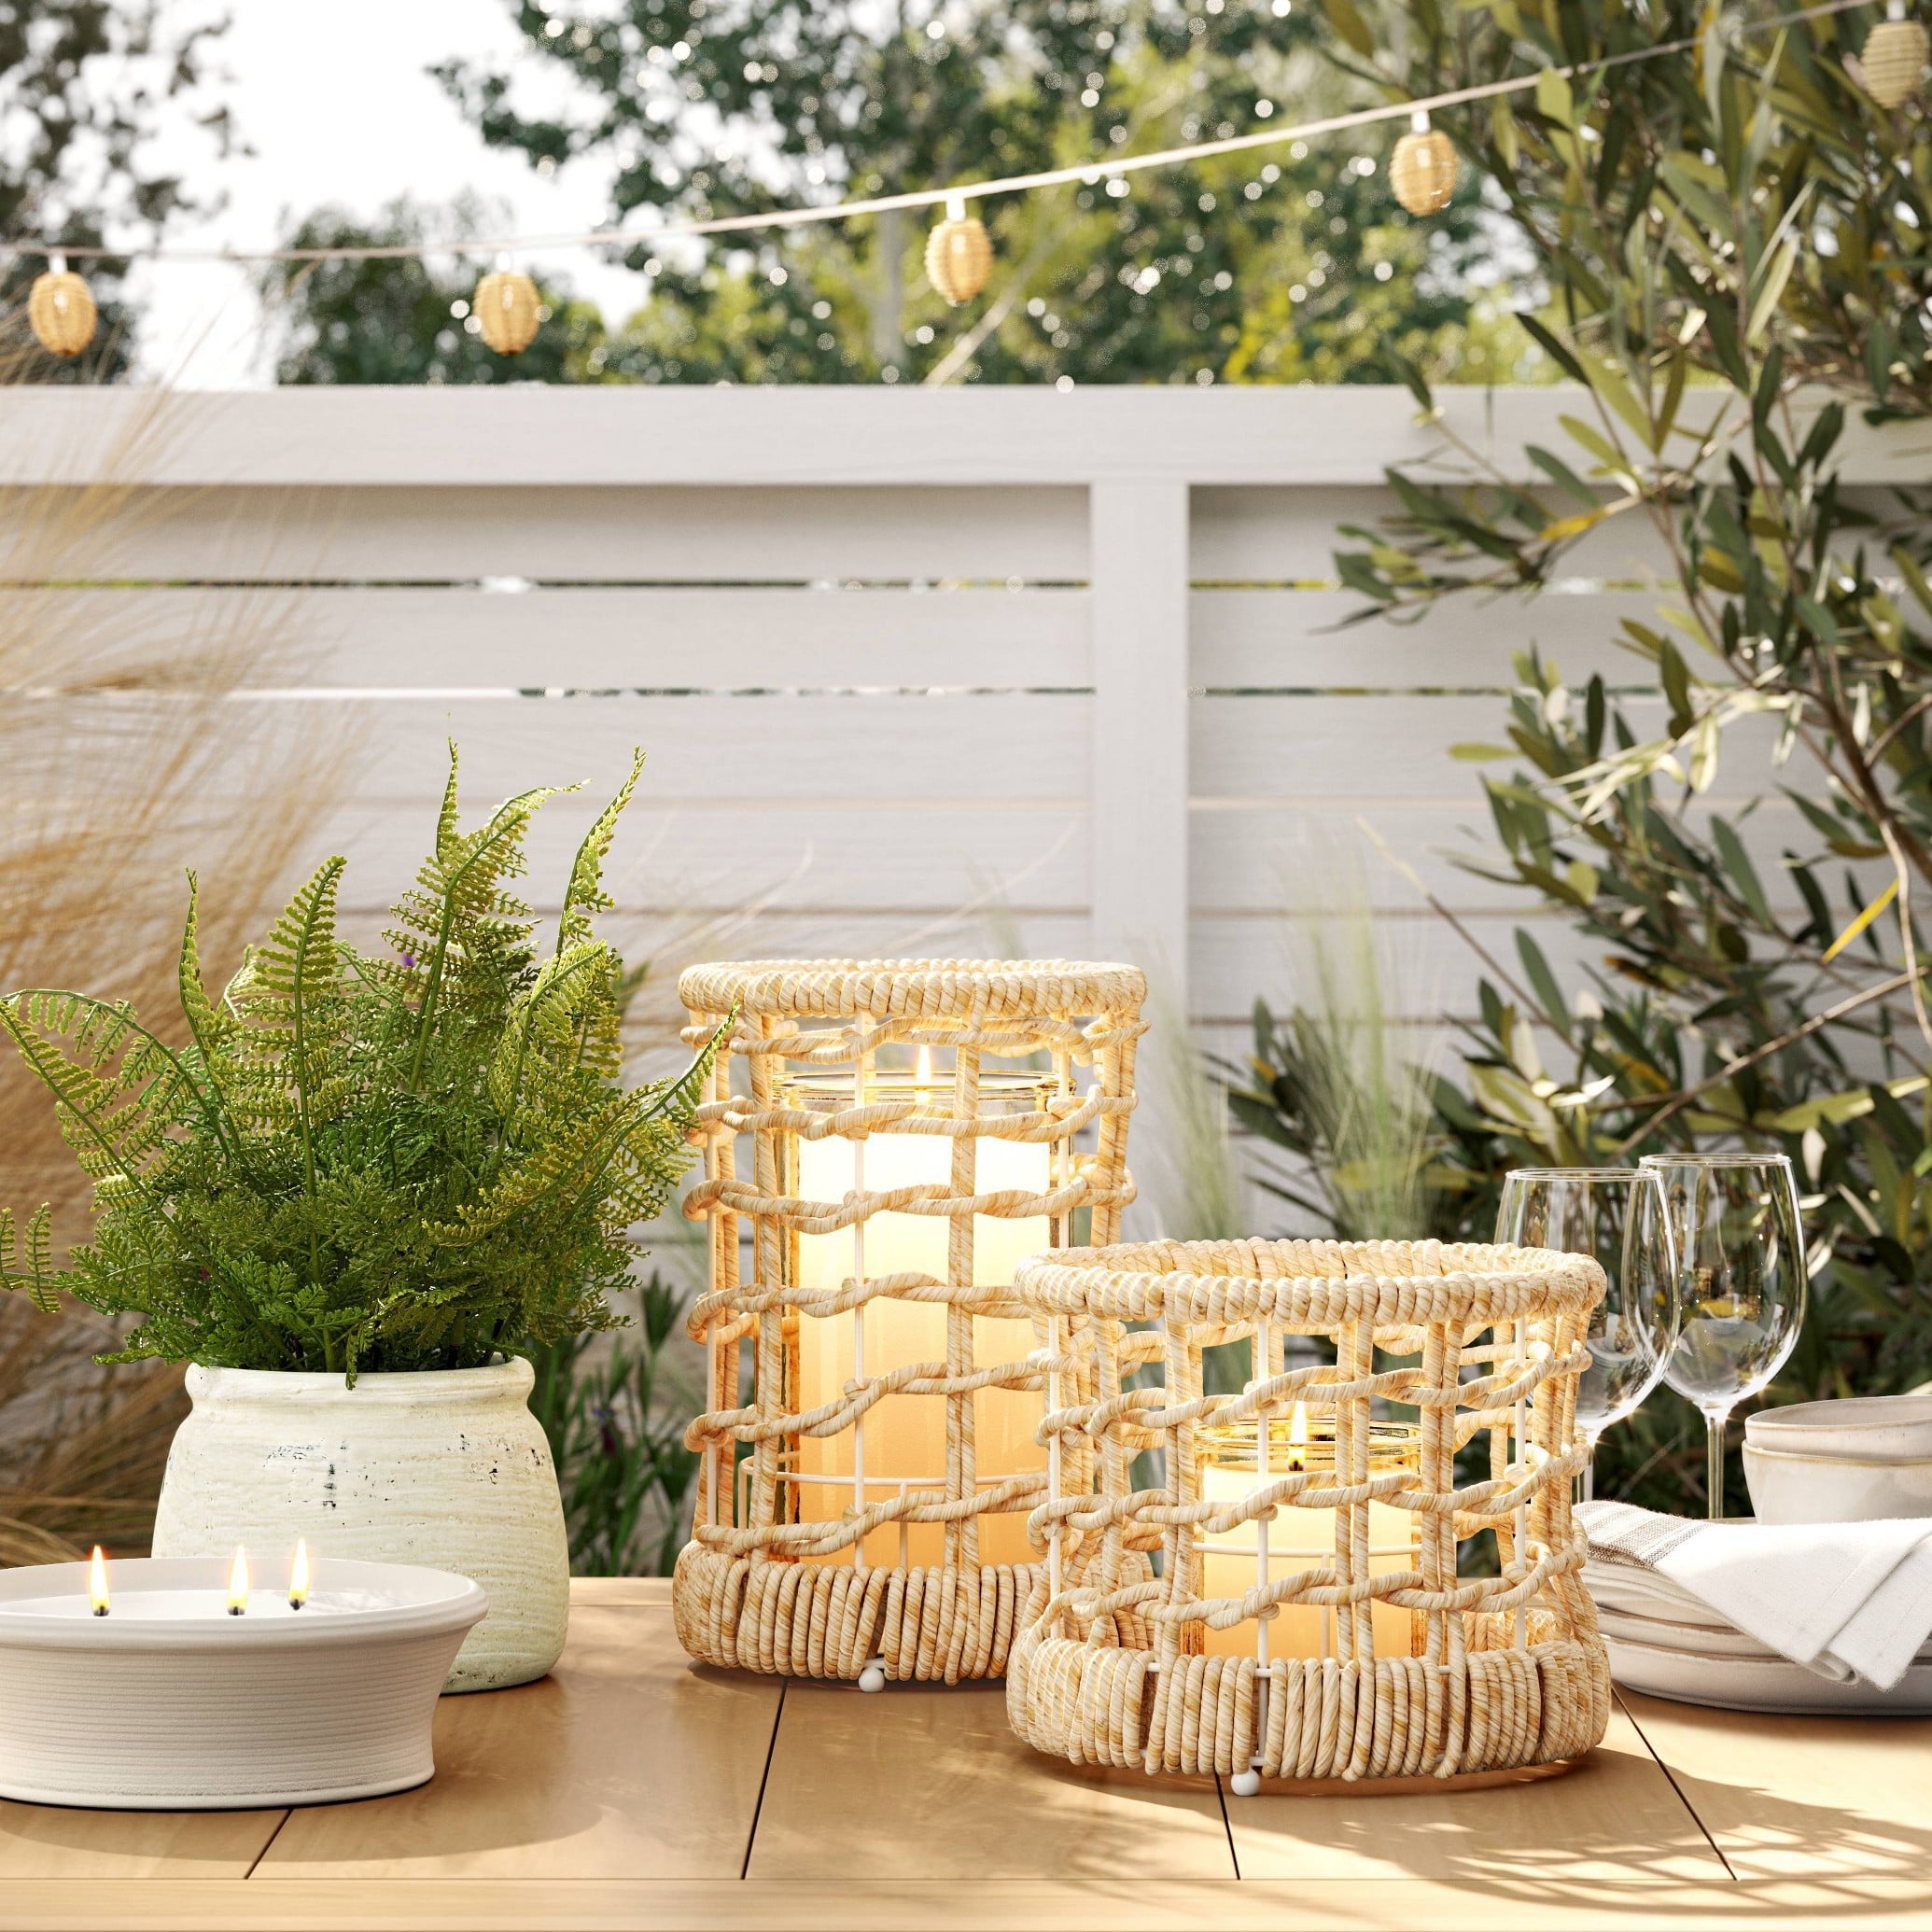 Elevate your next outdoor gathering with elegant disposable bamboo